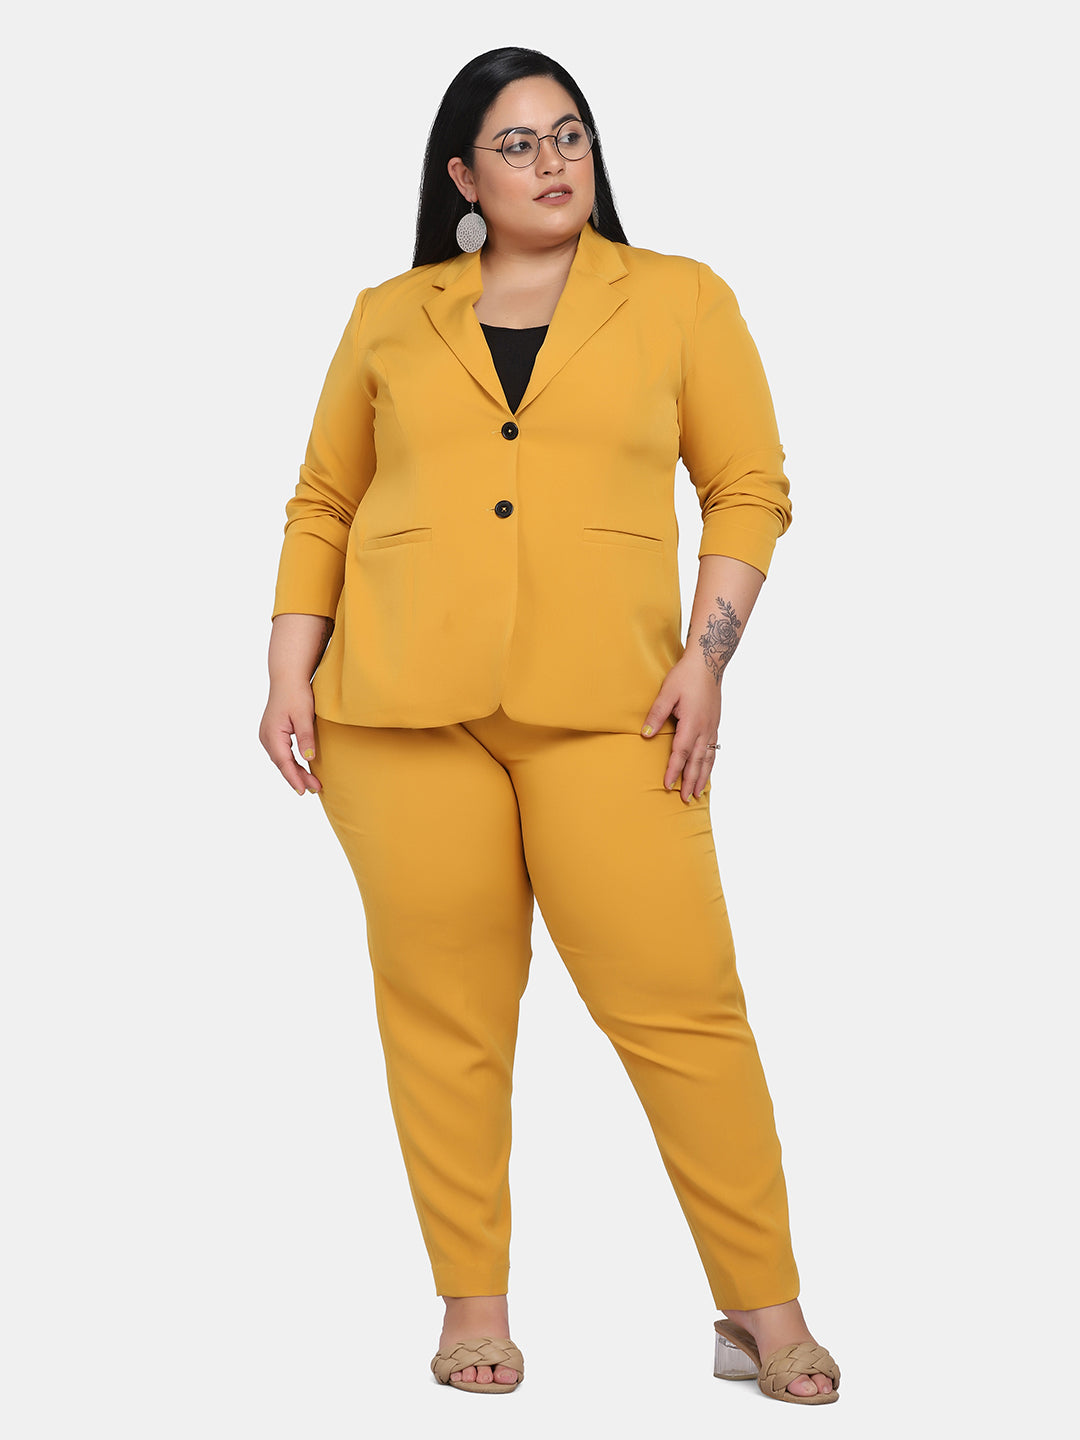 Women's Formal Pant Suit For Work- Mustard Yellow – The Ambition